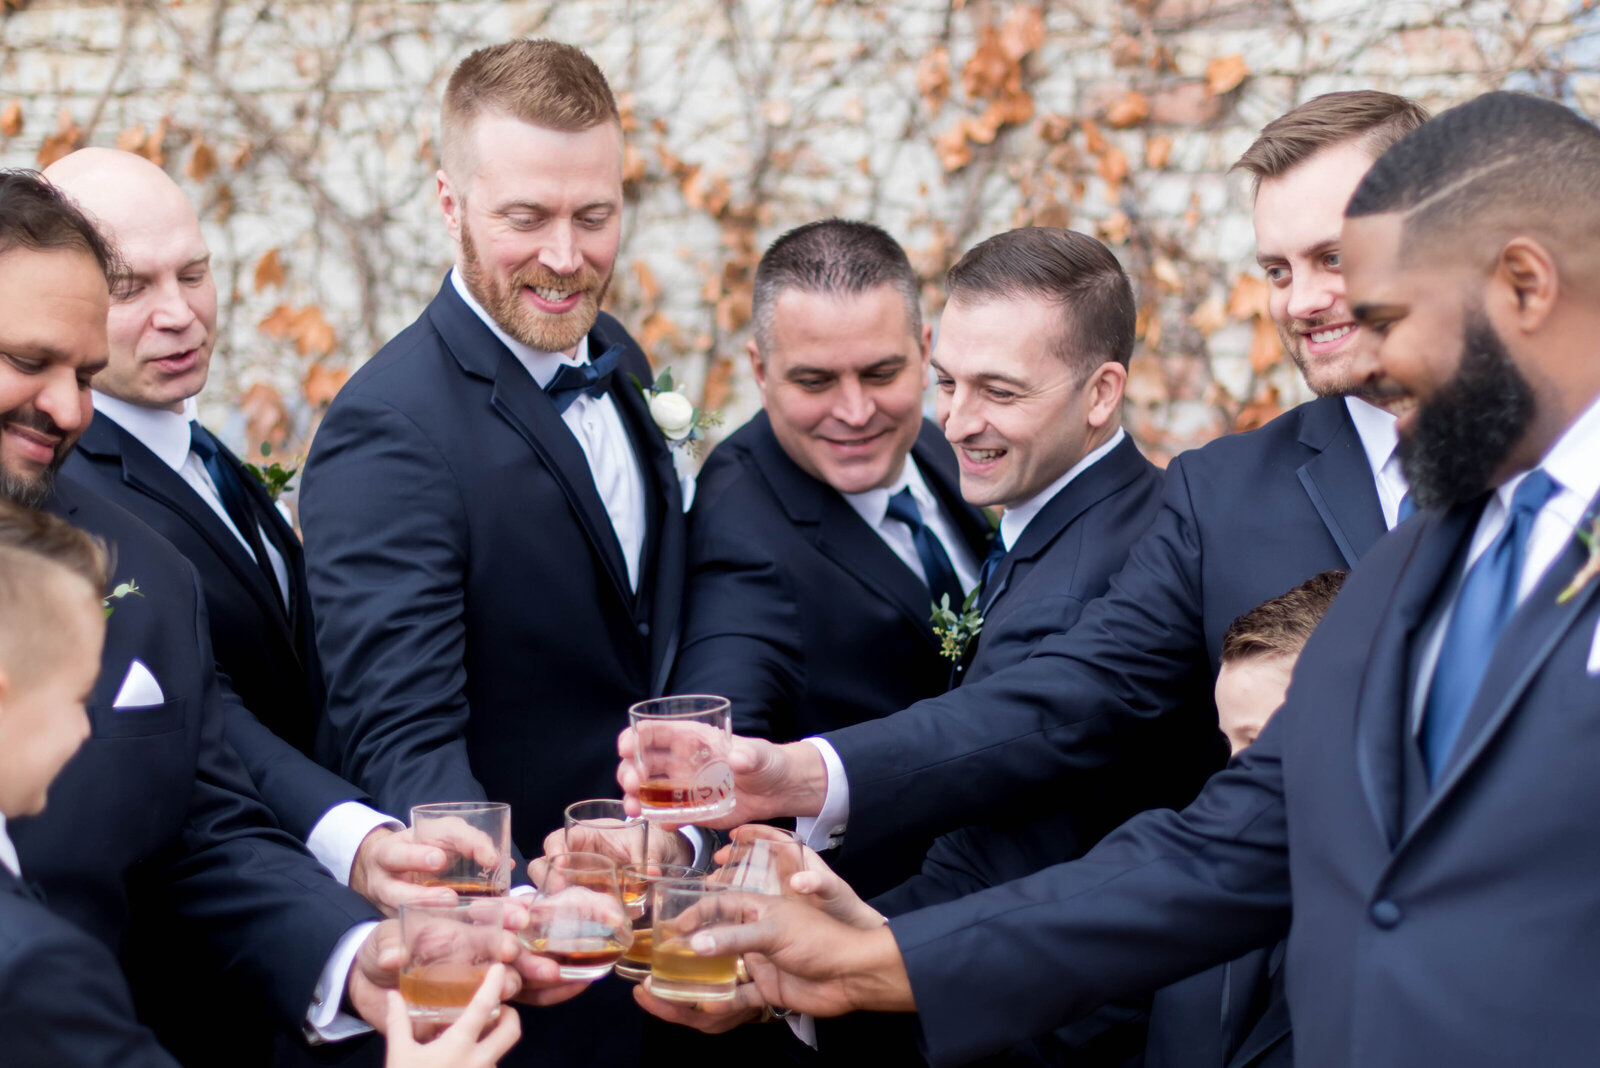 navy wedding suits, whisky groomsmen gifts